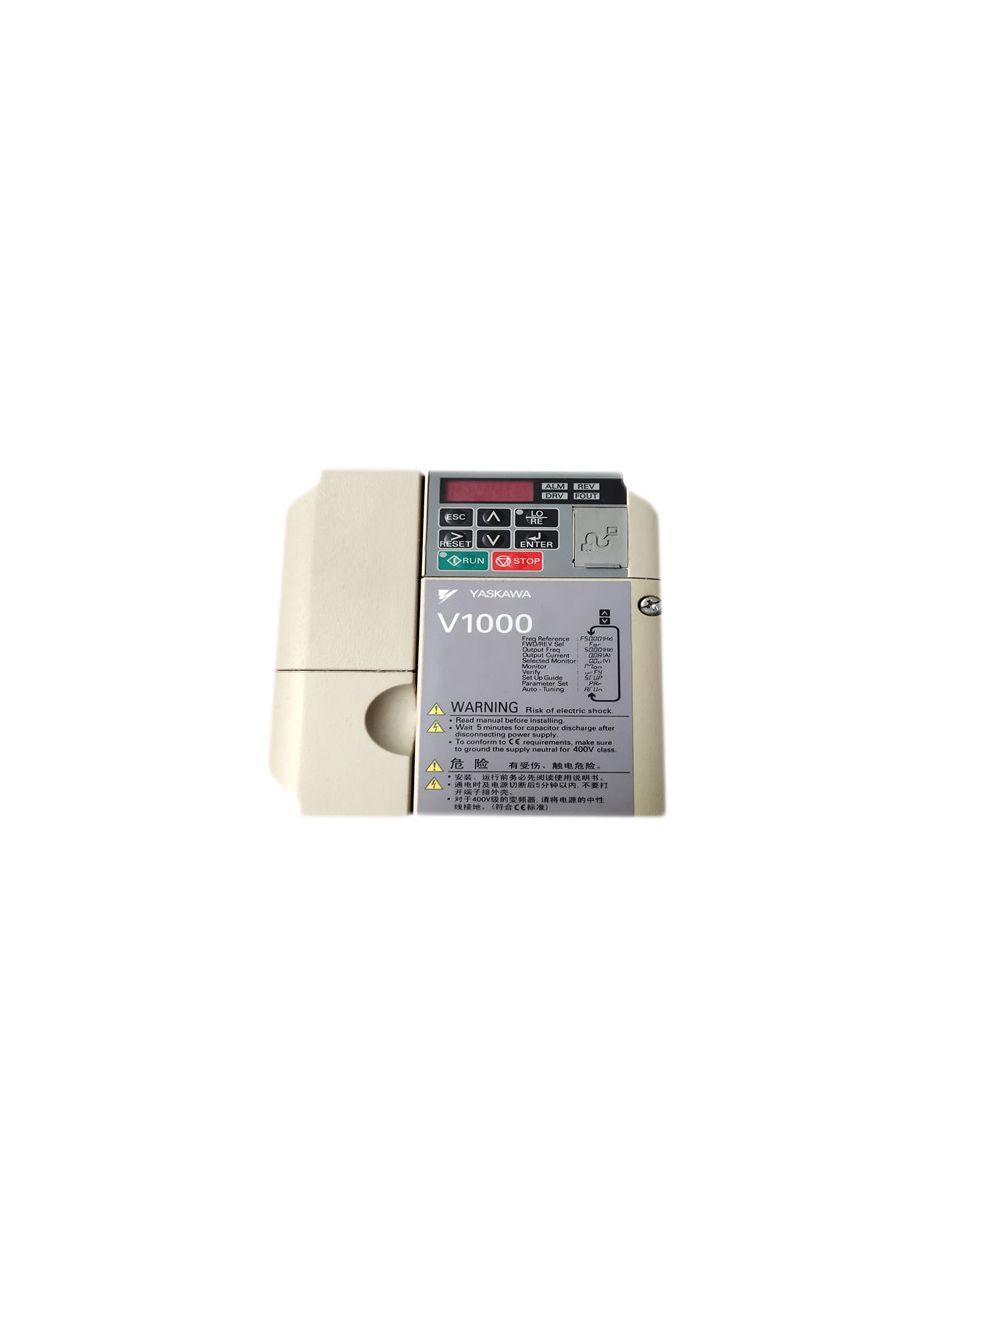 New In stock for sale, Yaskawa VFD Frequency Converter CIMR-VB4A0005BBA